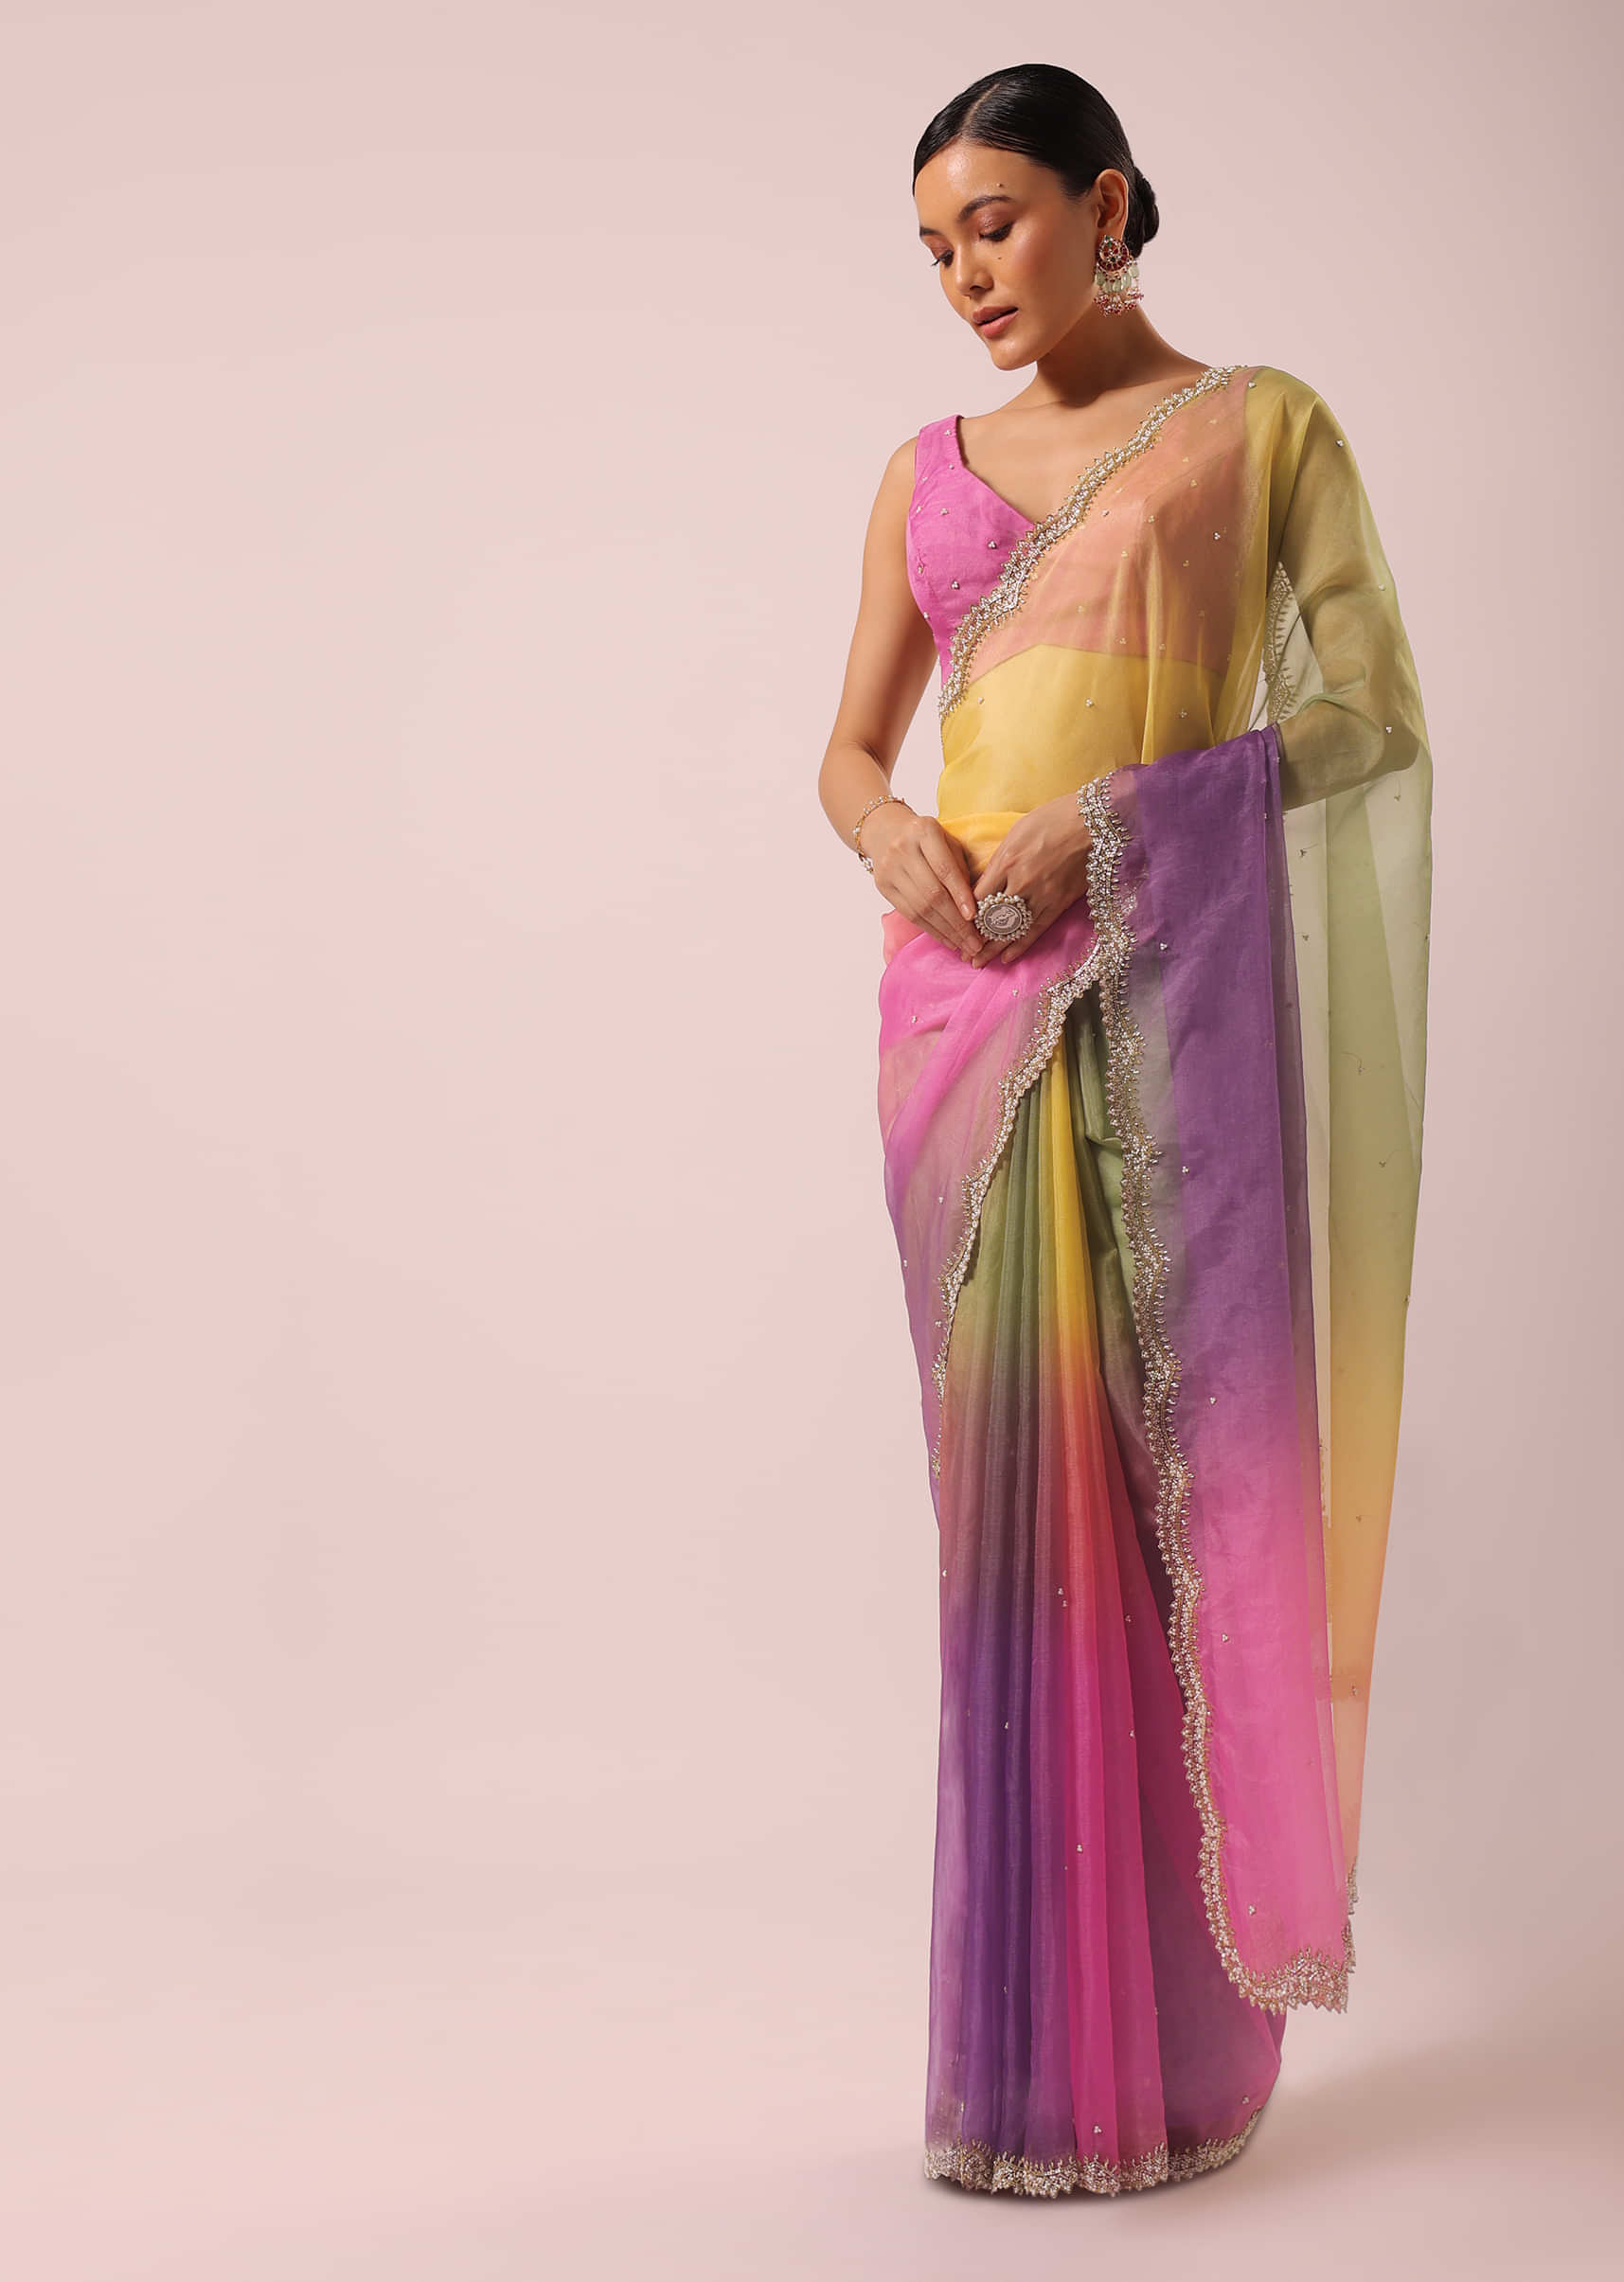 Is The Sari Not Smart Enough?